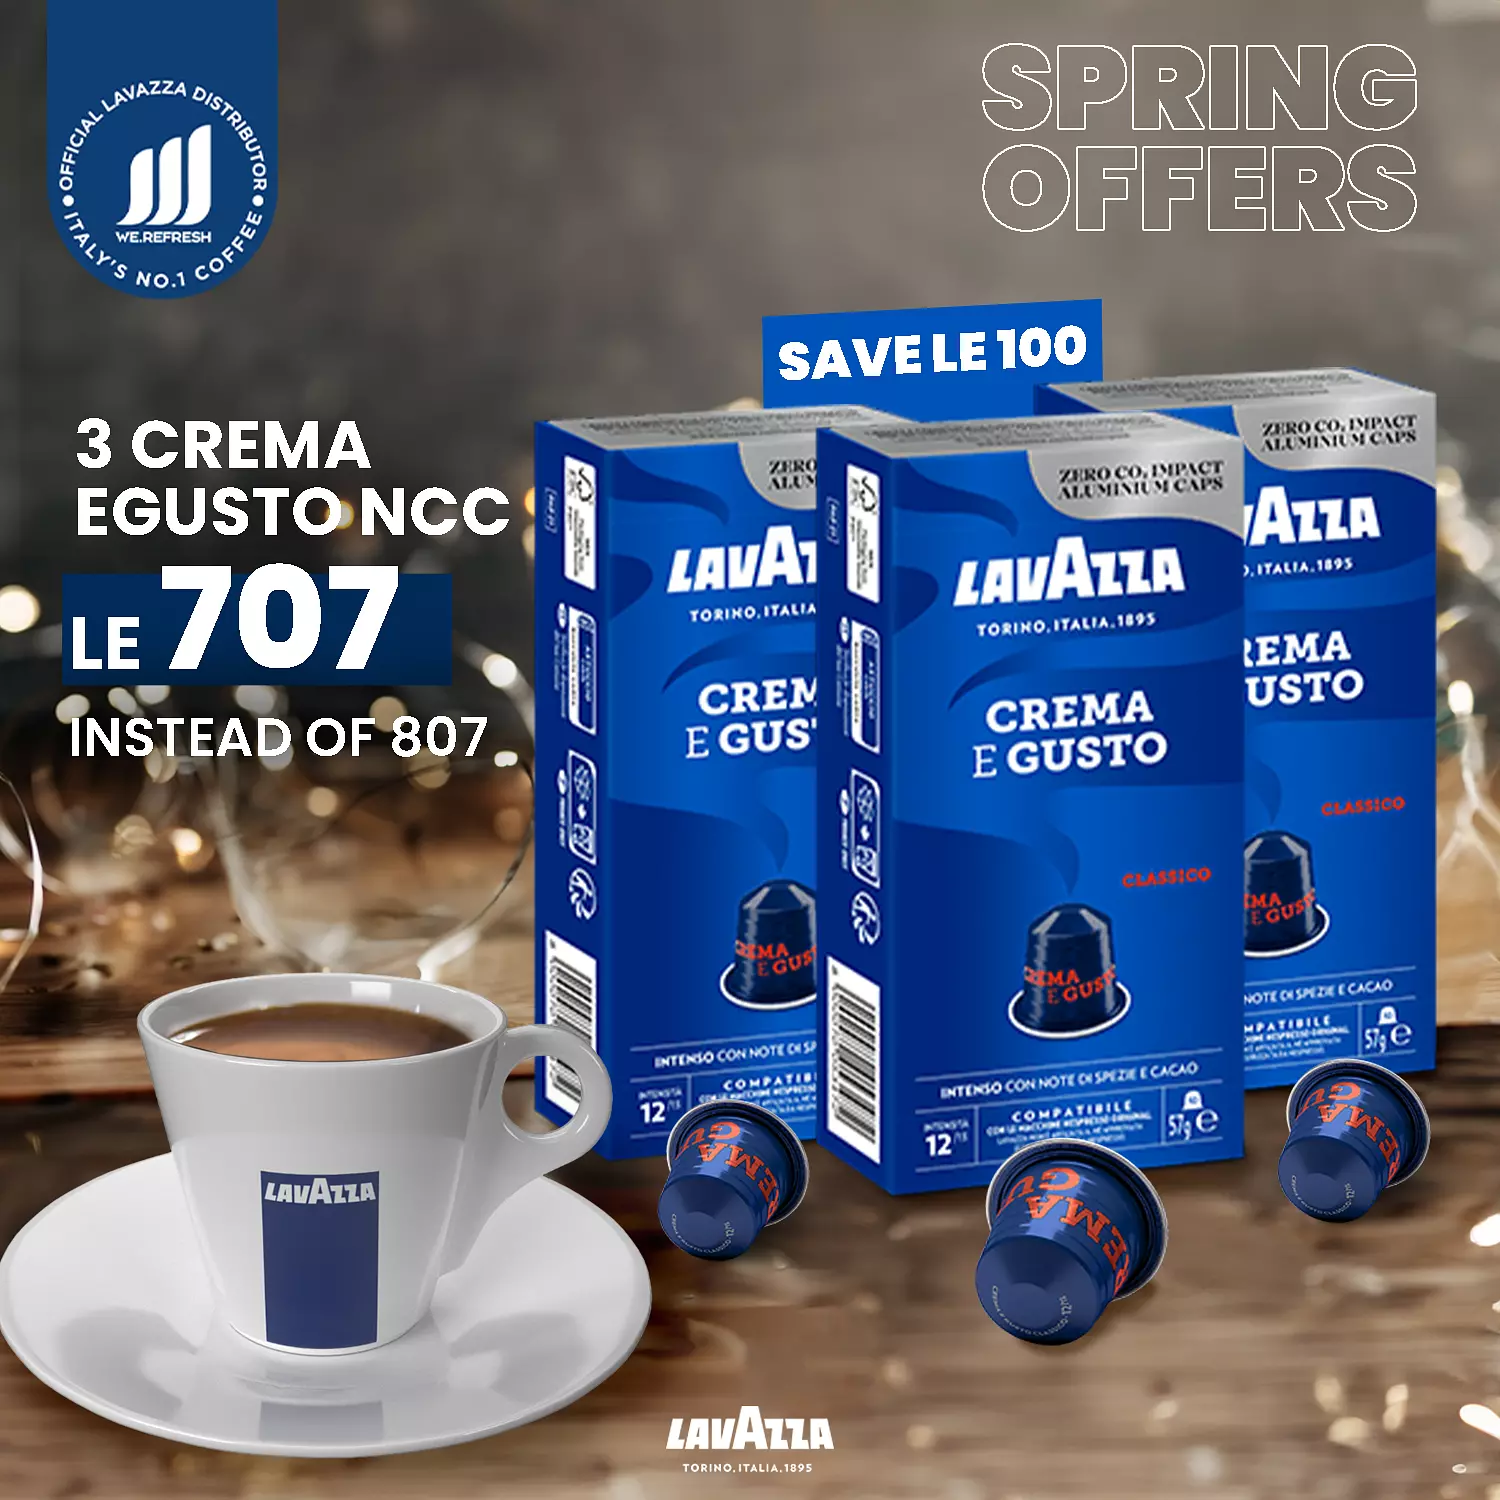 Lavazza spring offers hover image